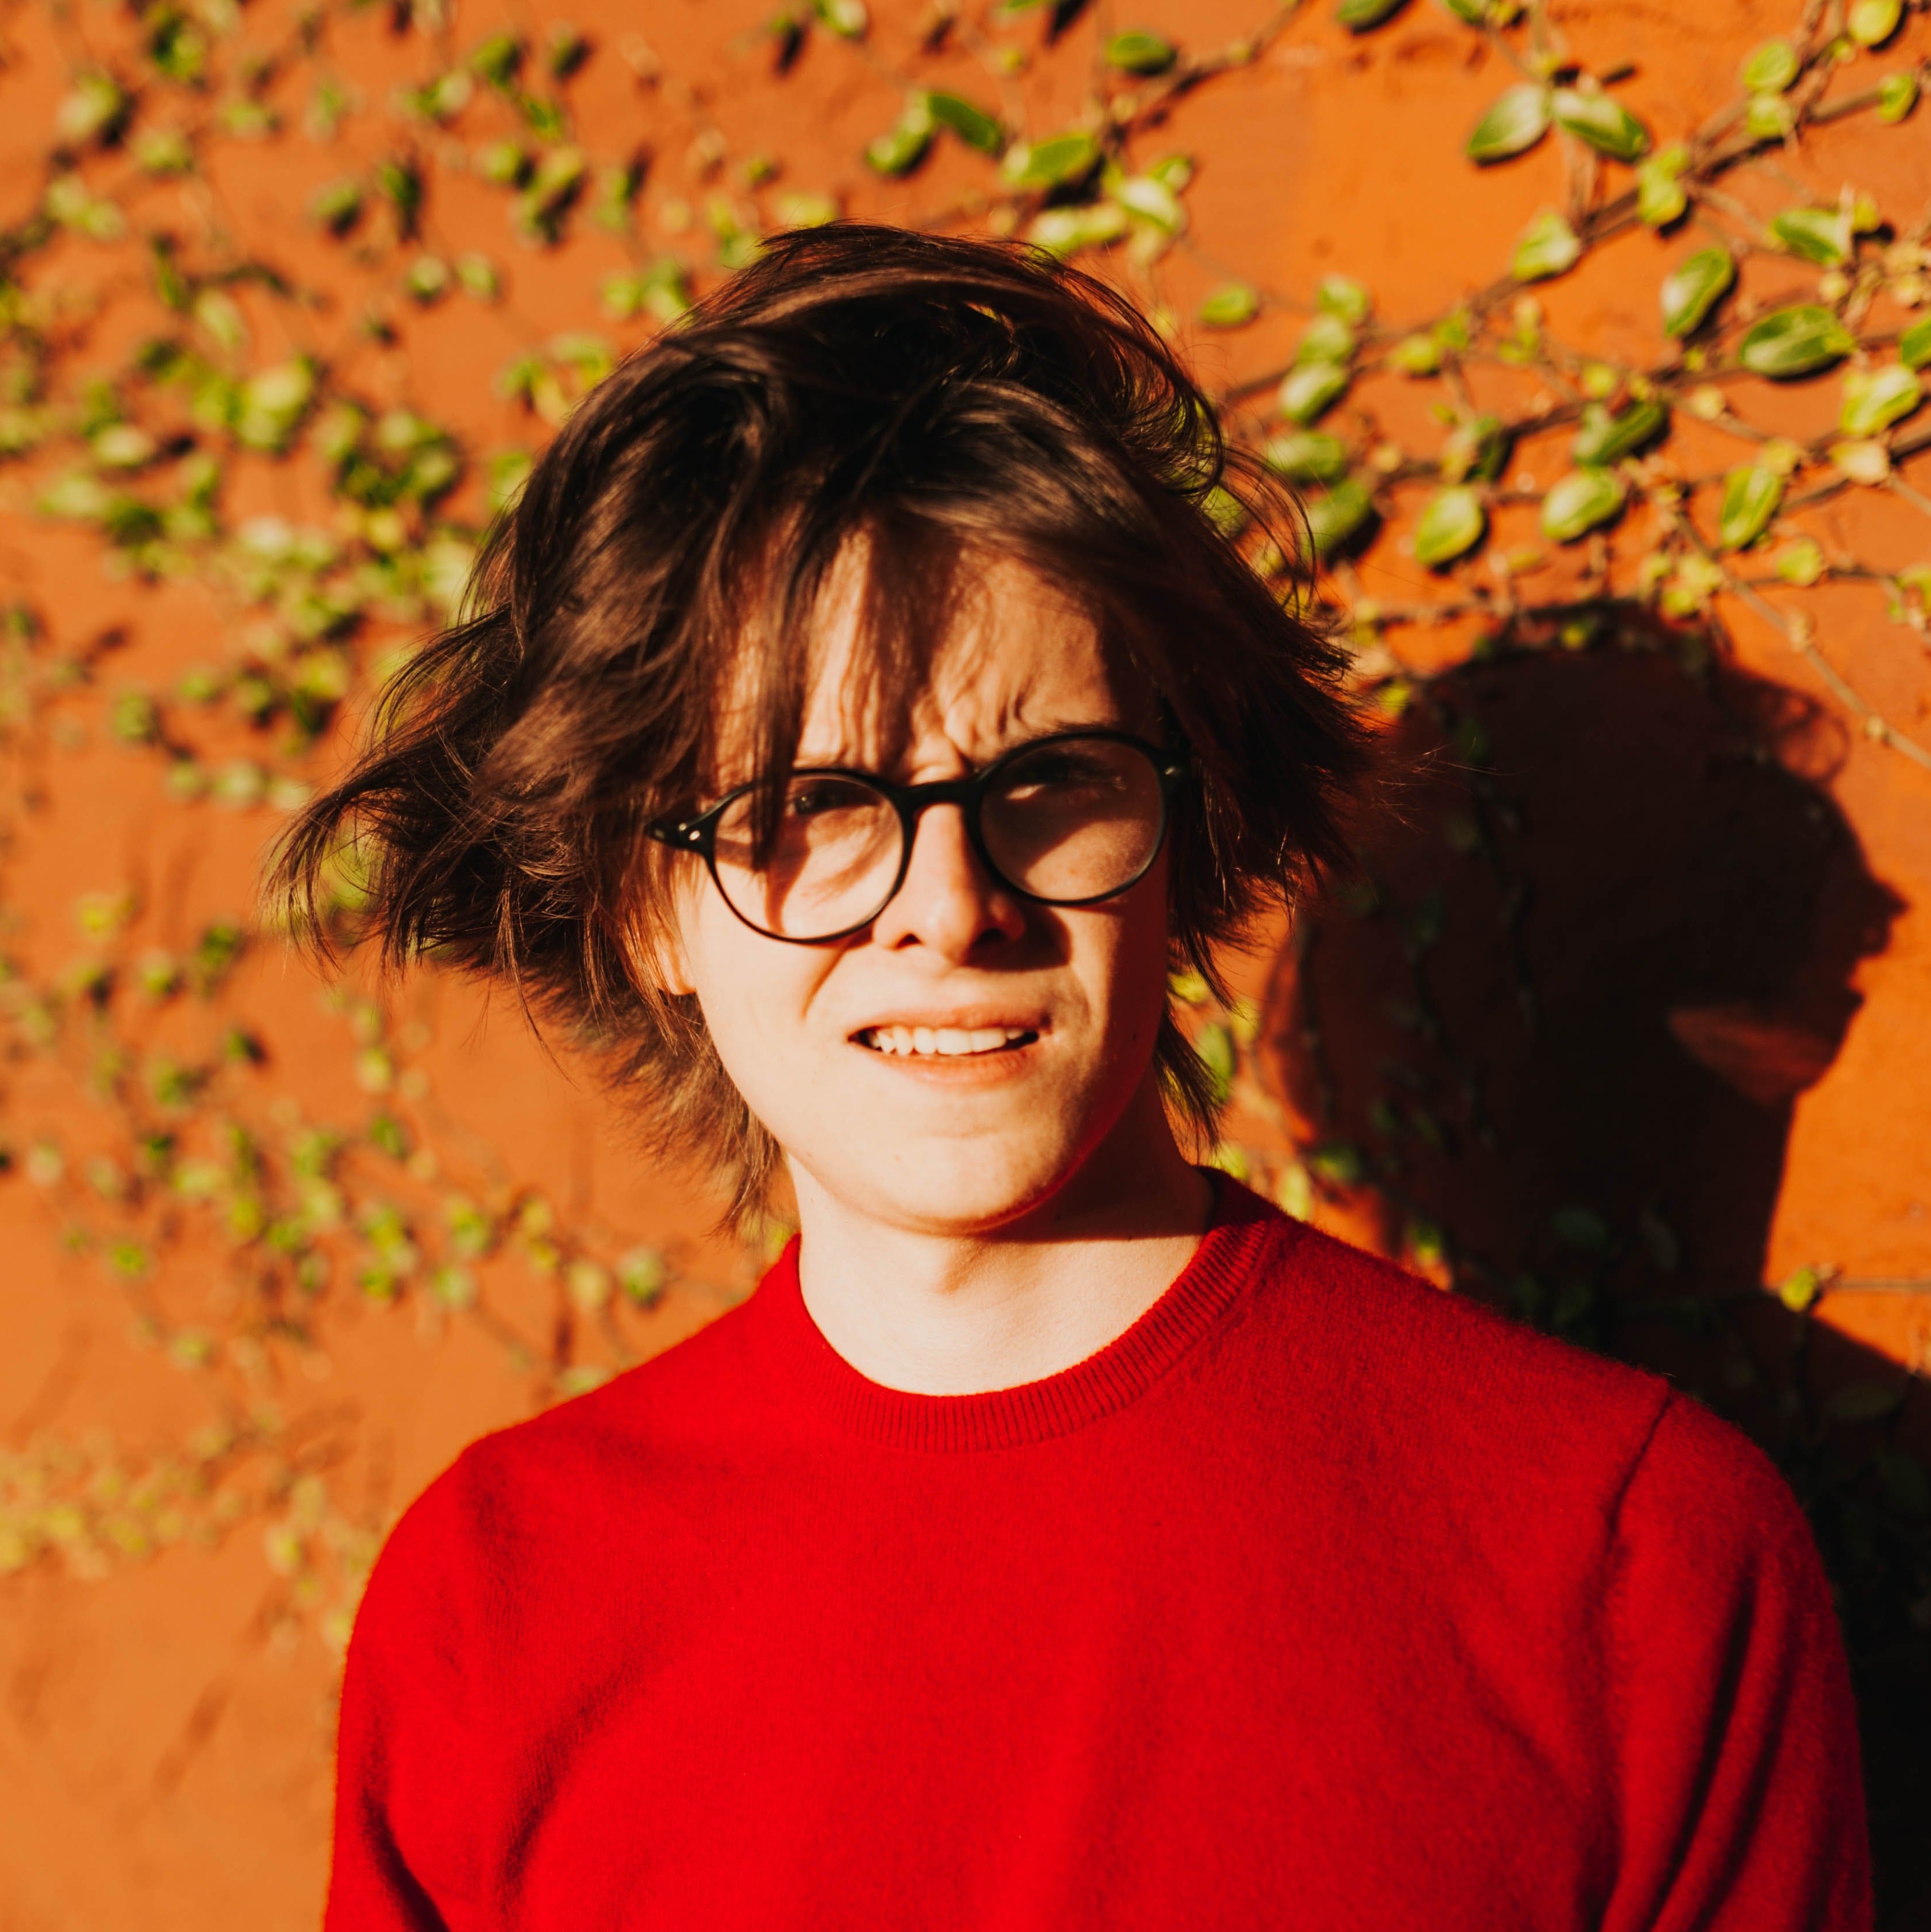 Derek Simpson, Colin Blunstone, Her Song, The Zombies, Pickymagazin, Pickymag, Blog, Blogger, Online, Indie, Cover, Single, Review